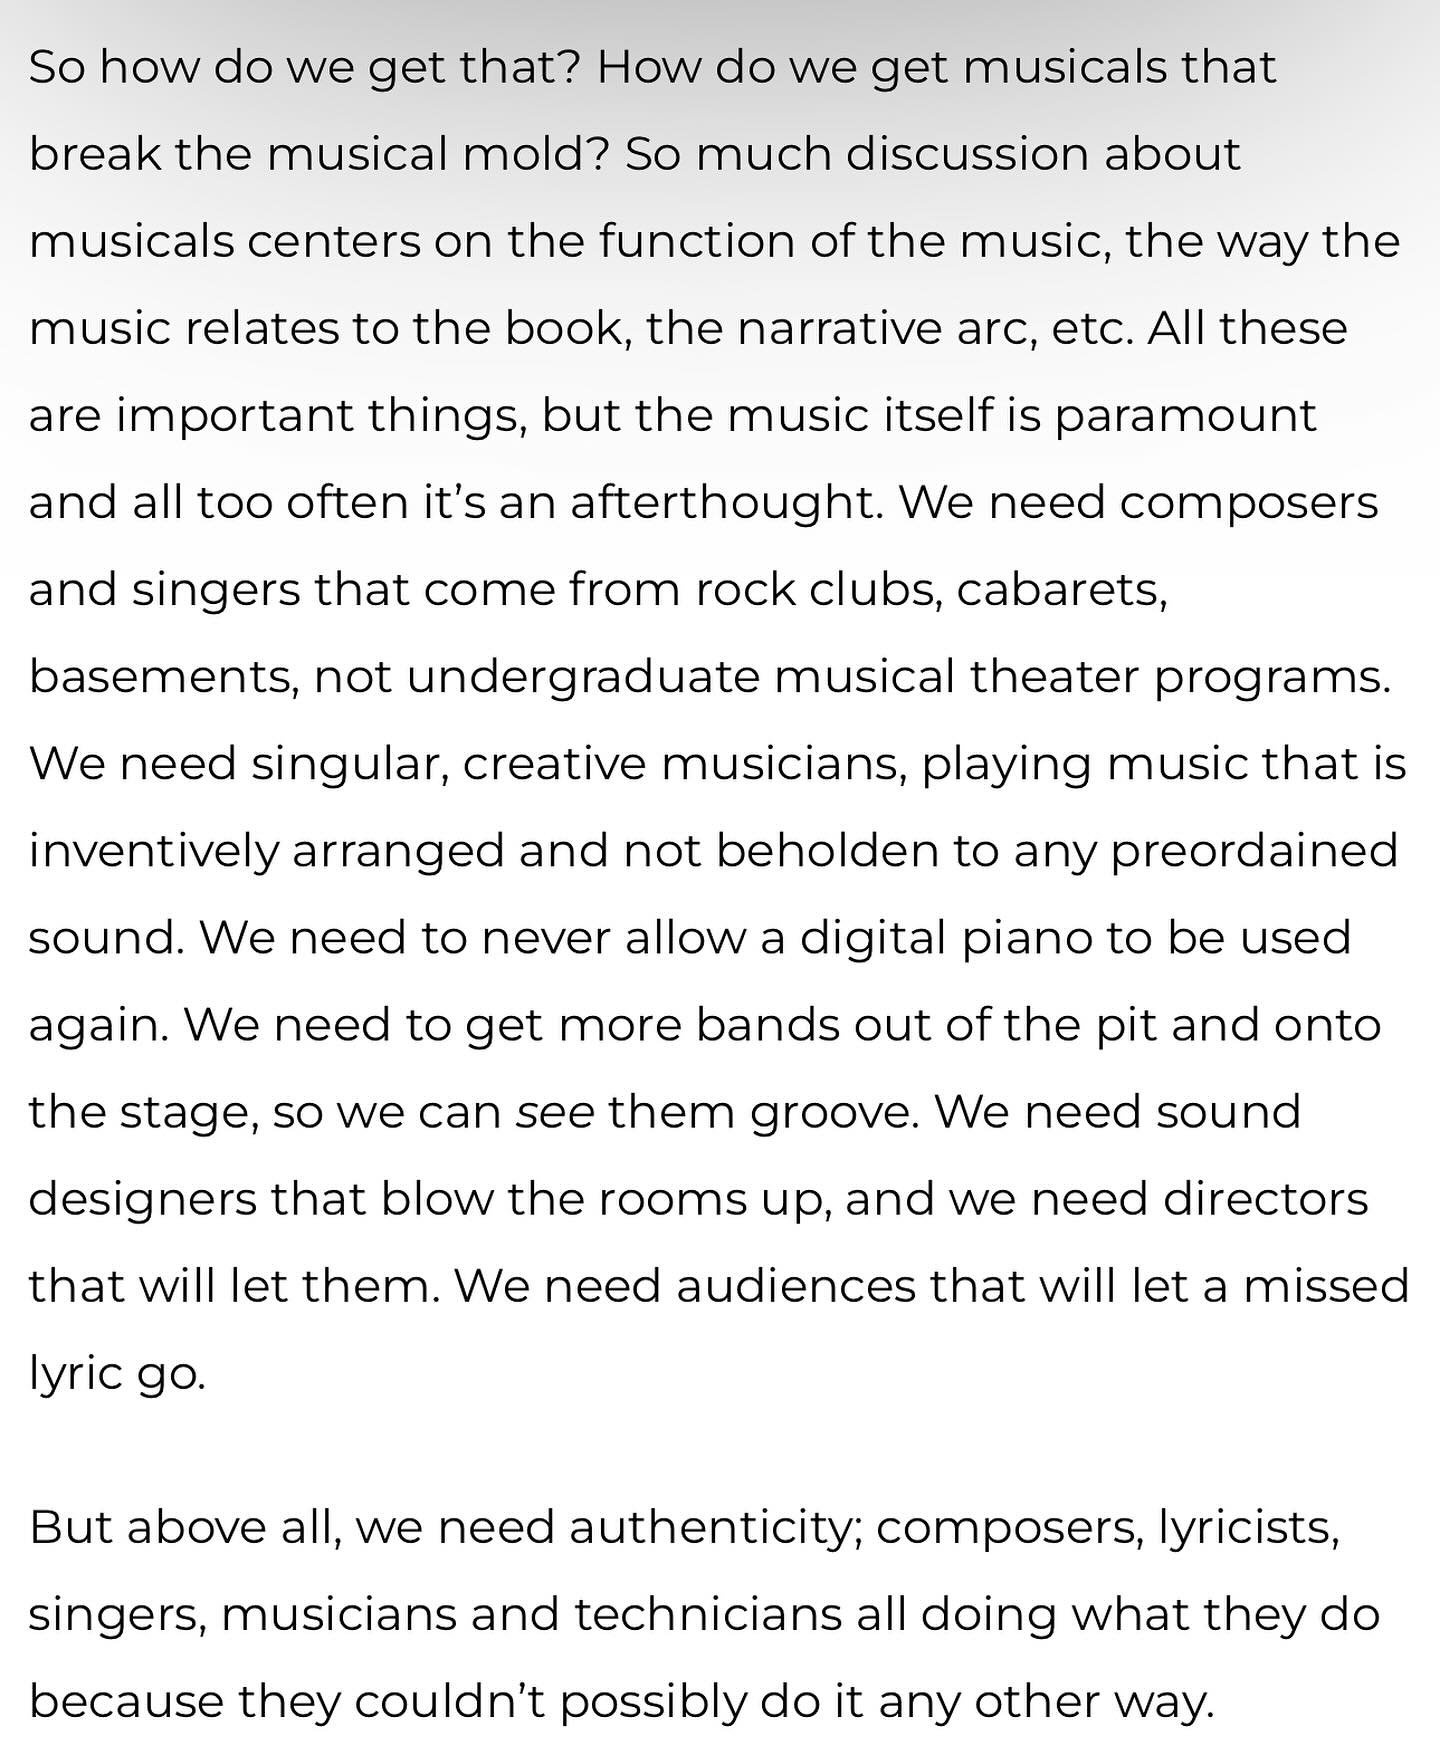 &ldquo;So how do we get that? How do we get musicals that break the musical mold? So much discussion about musicals centers on the function of the music, the way the music relates to the book, the narrative arc, etc. All these are important things, b